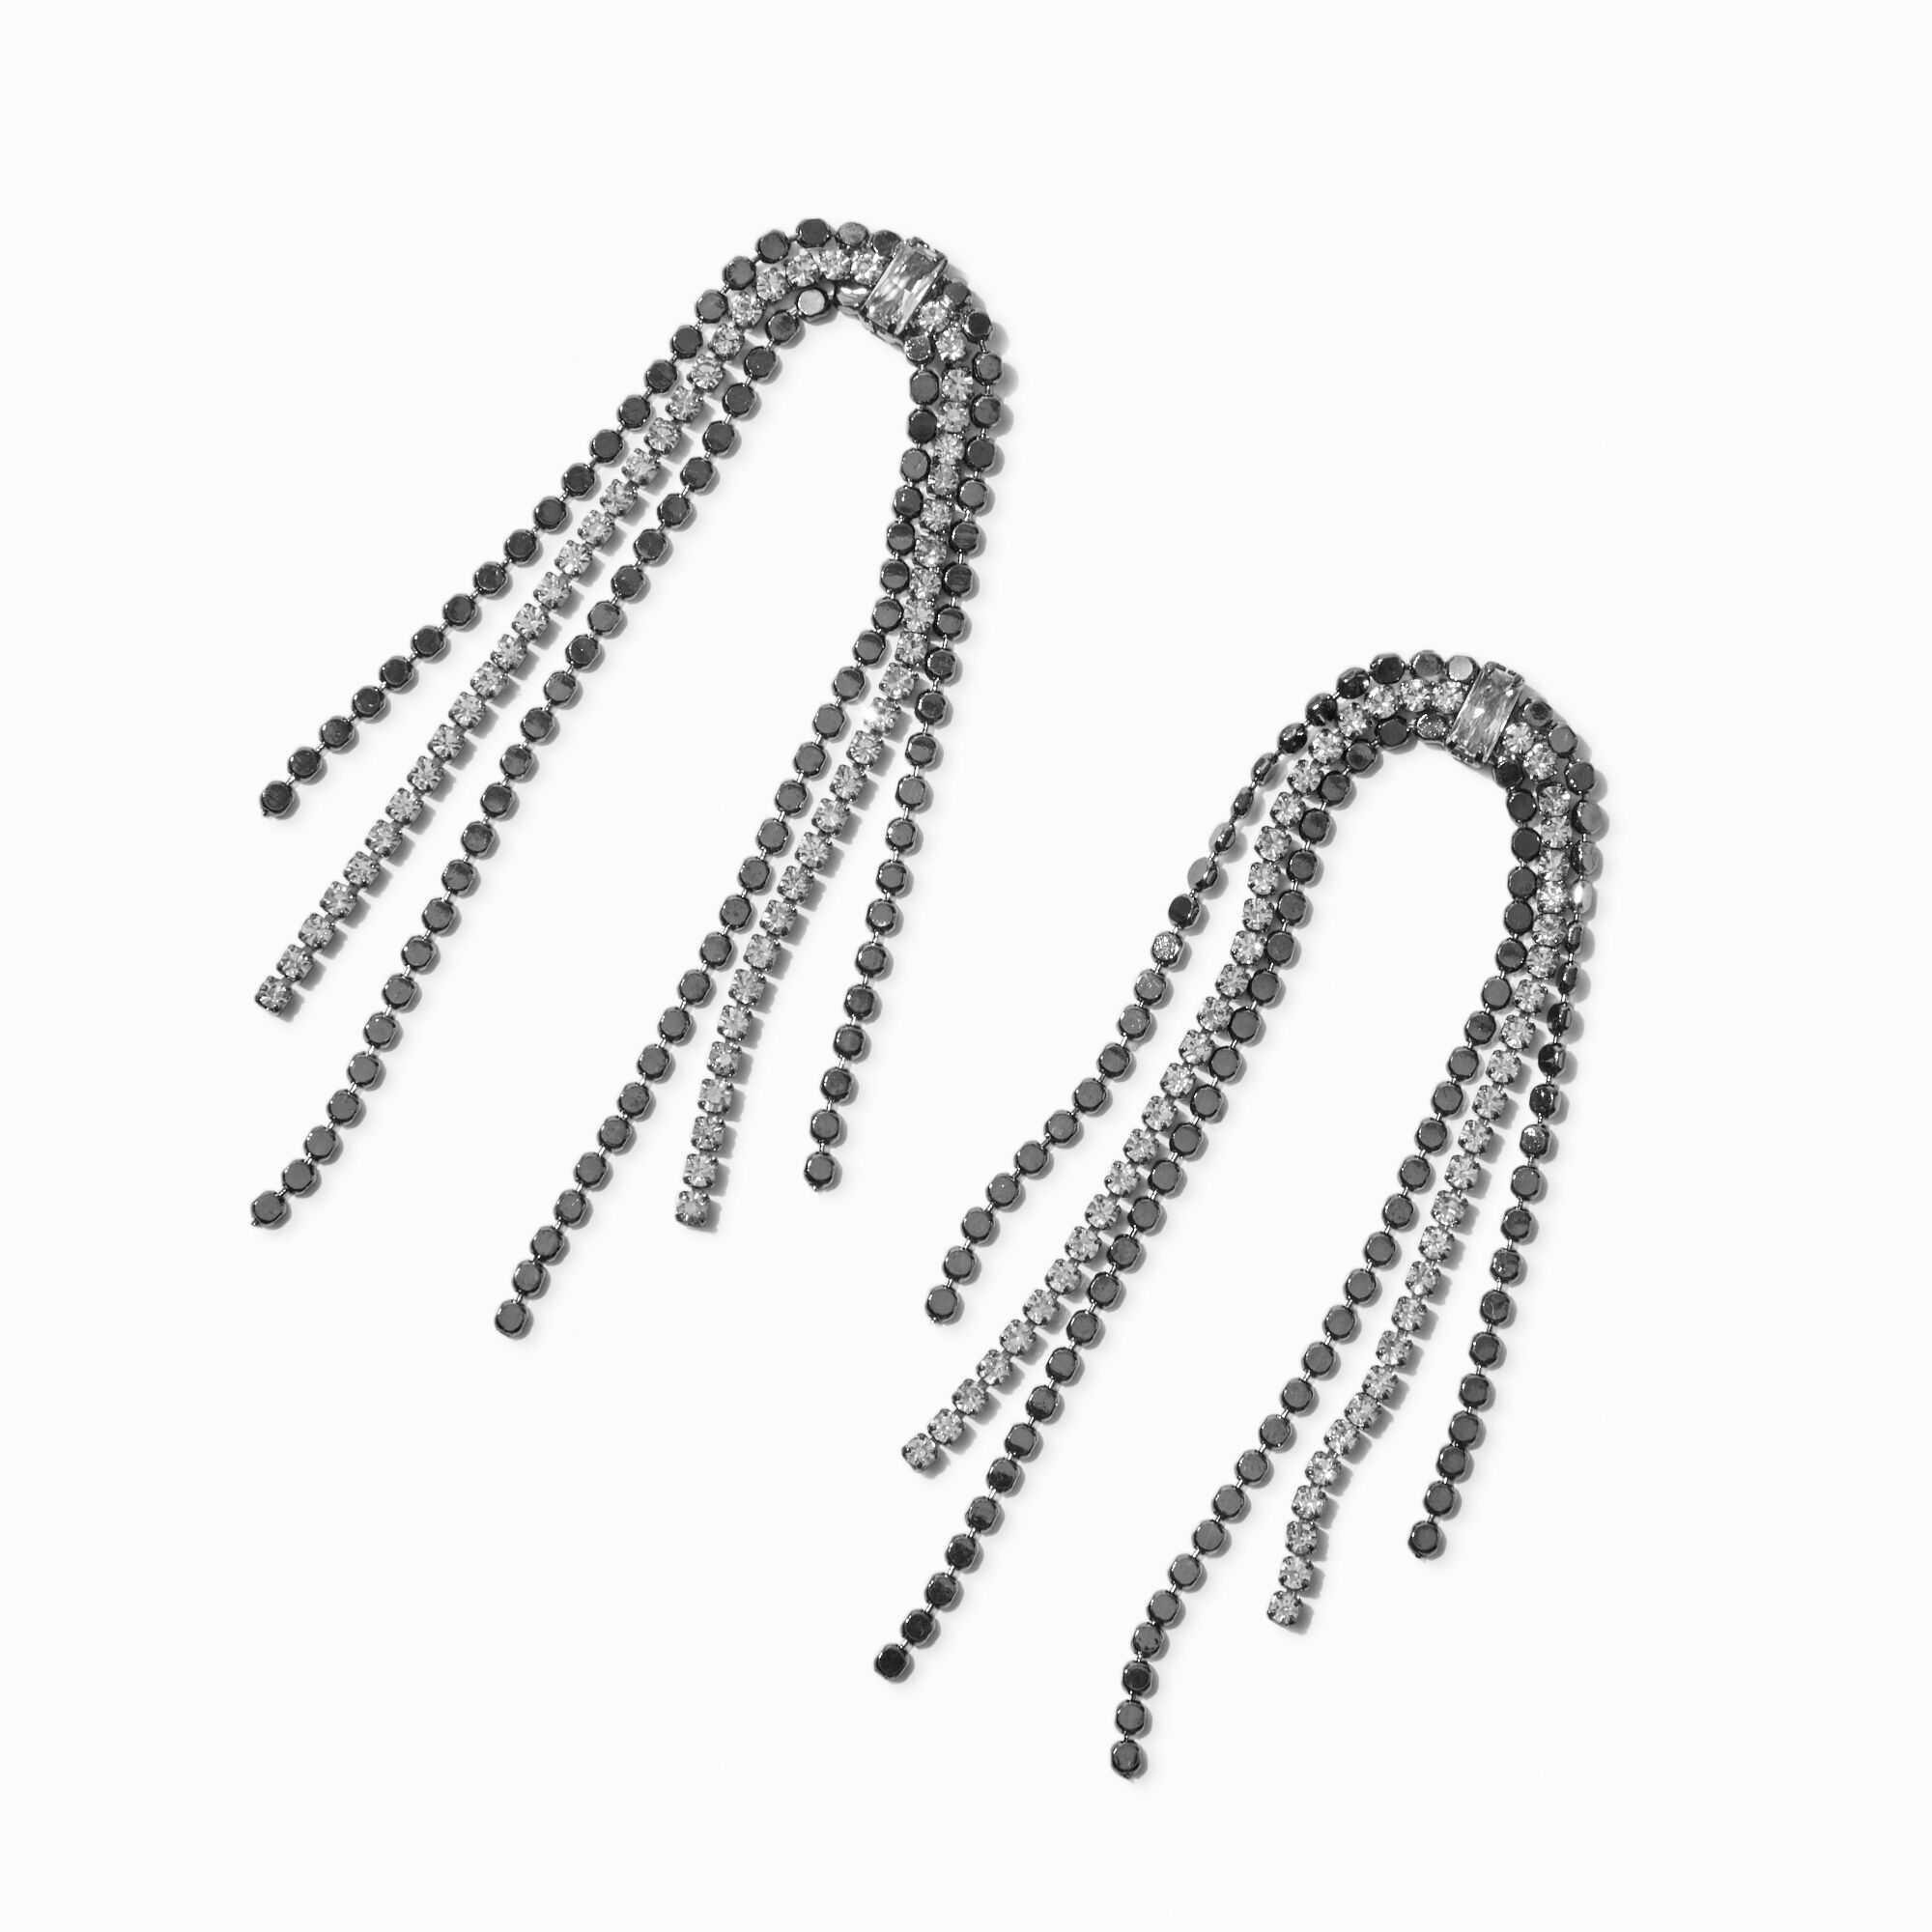 View Claires Hematite Rhinestone Horse Tail Fringe 3 Drop Earrings information